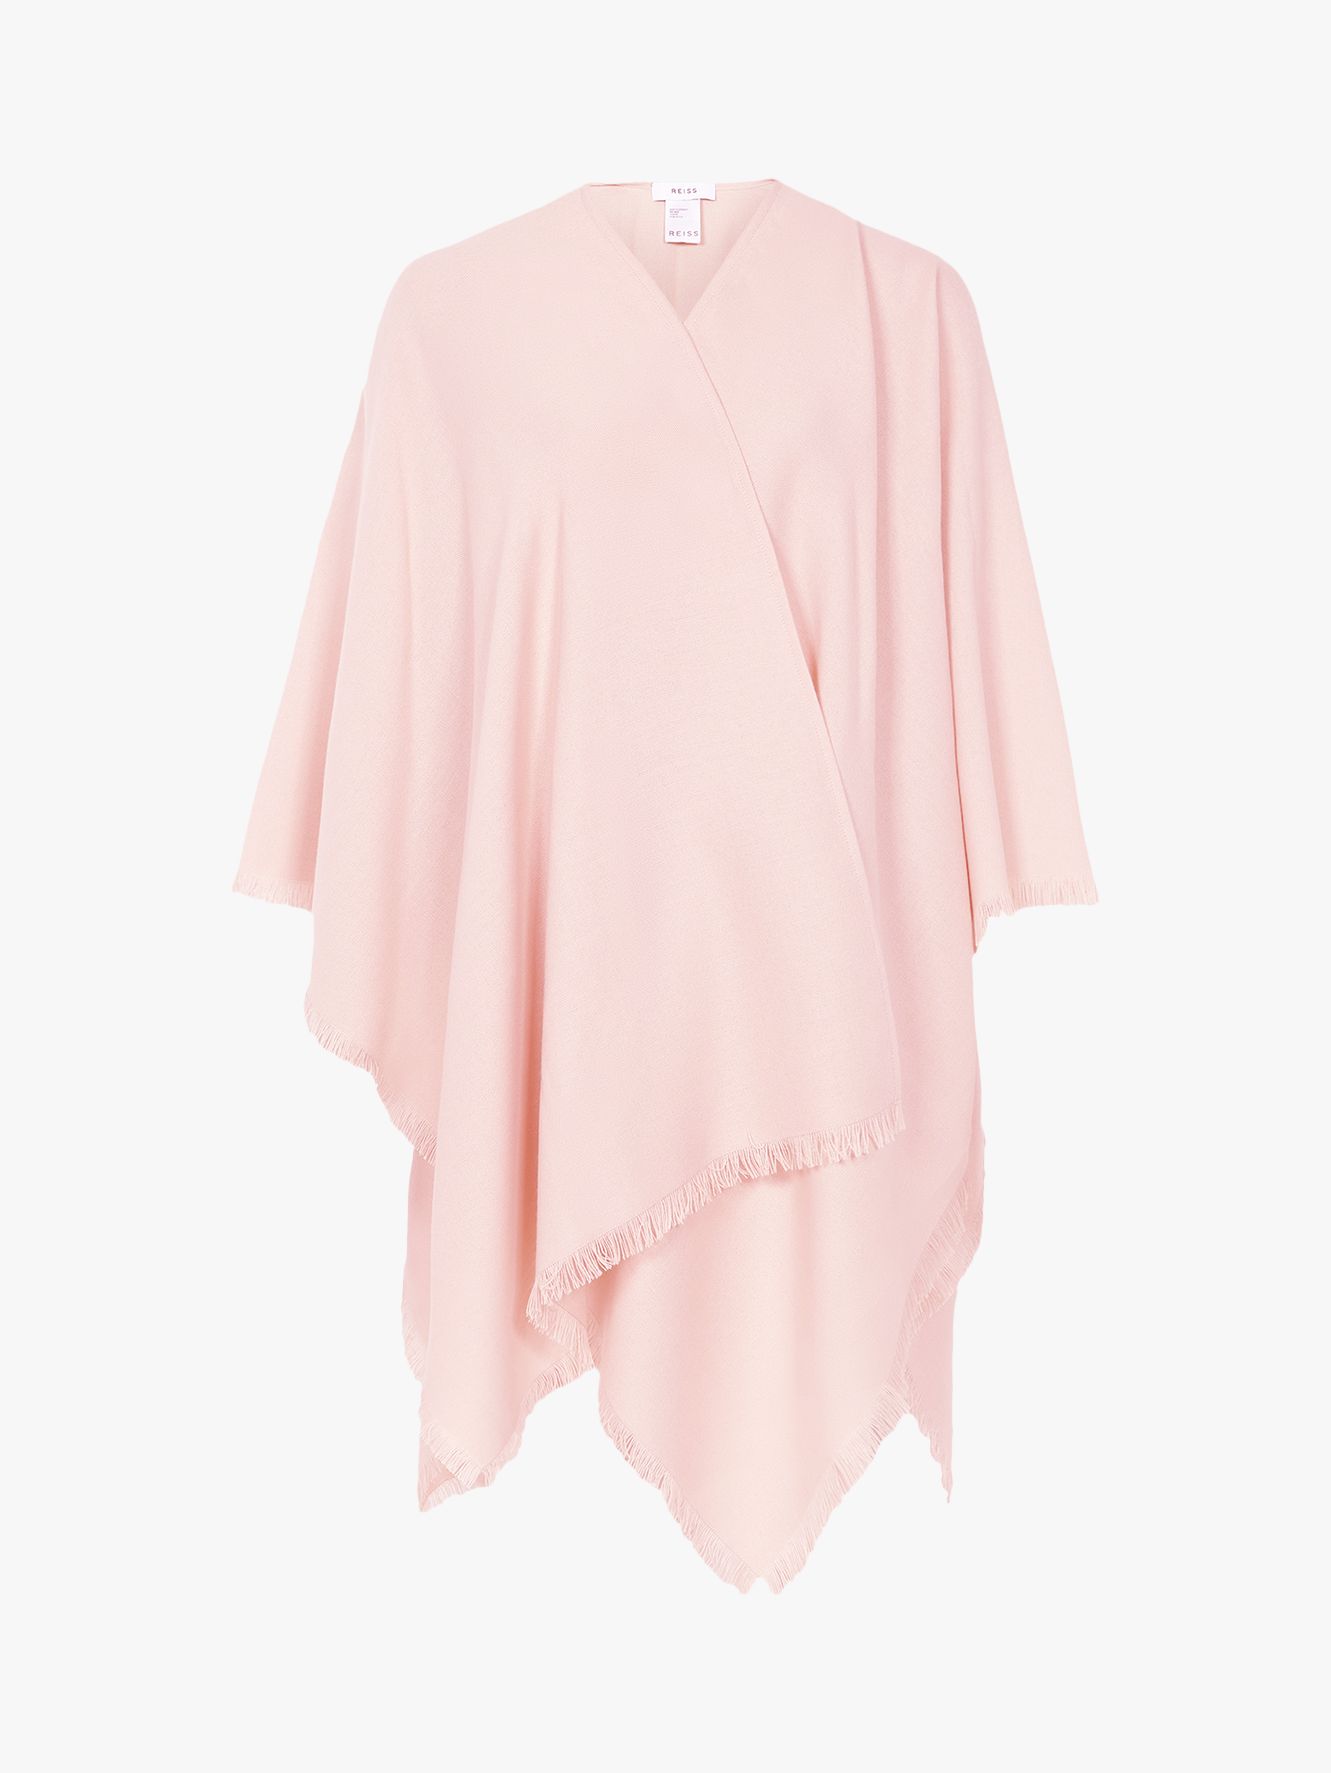 Reiss Grace Summer Poncho, Blossom Pink